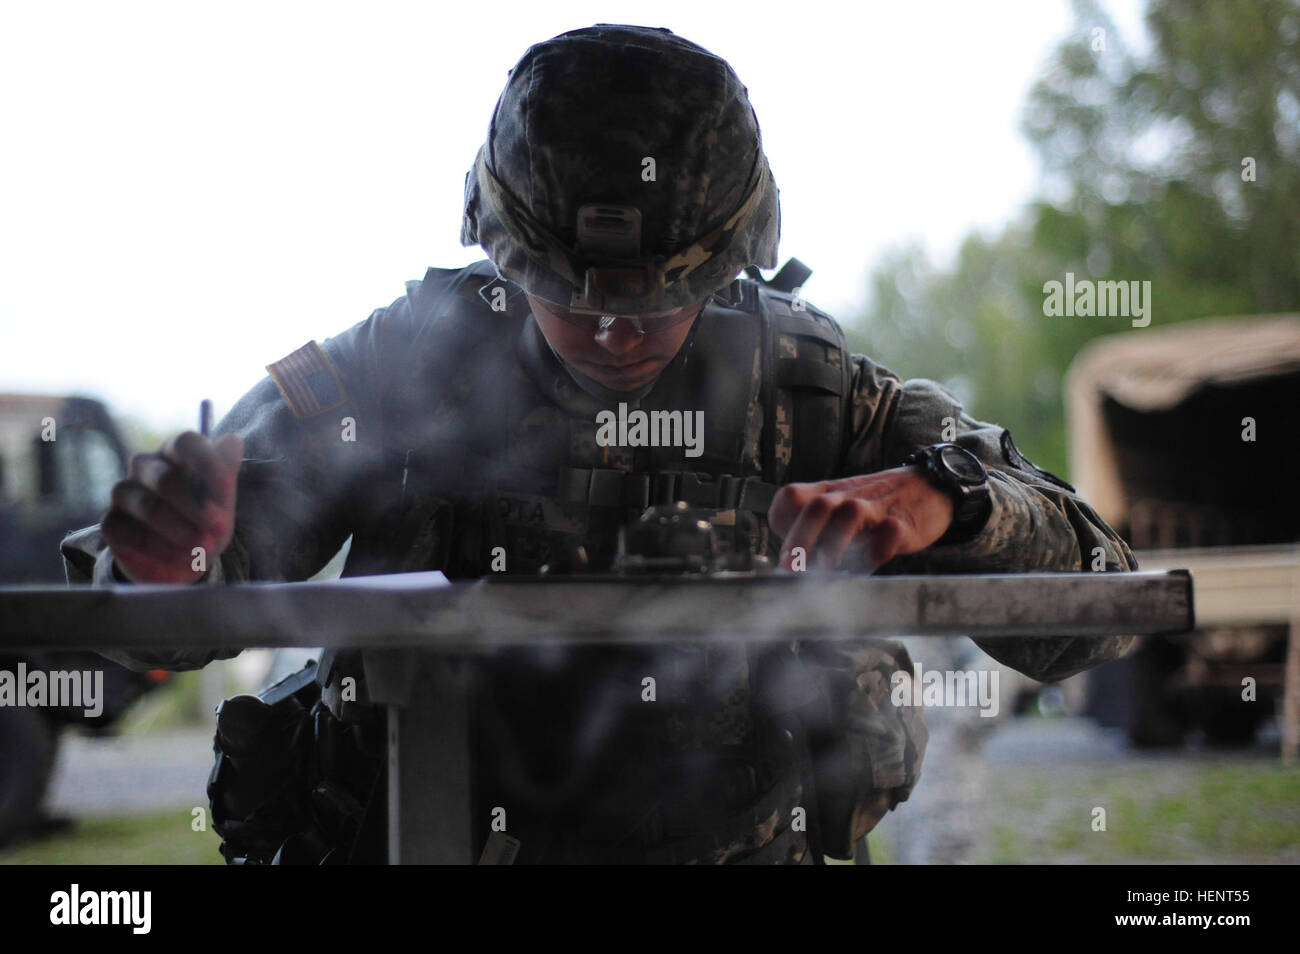 U.S. Army 2nd Lt. Ocatvio Mota, assigned to 5th Signal Command,  plots coordinates on a map during the land navigation portion of the  European Best Warrior Competition in Grafenwoehr, Germany, Sept. 14, 2014. The competition is a weeklong event that pushes Soldiers to the limits of their physical stamina, bearing, knowledge, adaptability and technical and tactical skills. The best warriors are ready and resilient Soldiers who live the Army values and lead from the front. (U.S. Army photo by Staff Sgt. Pablo N. Piedra/Released) European Best Warrior Competition 2014 140916-A-KG432-119 Stock Photo